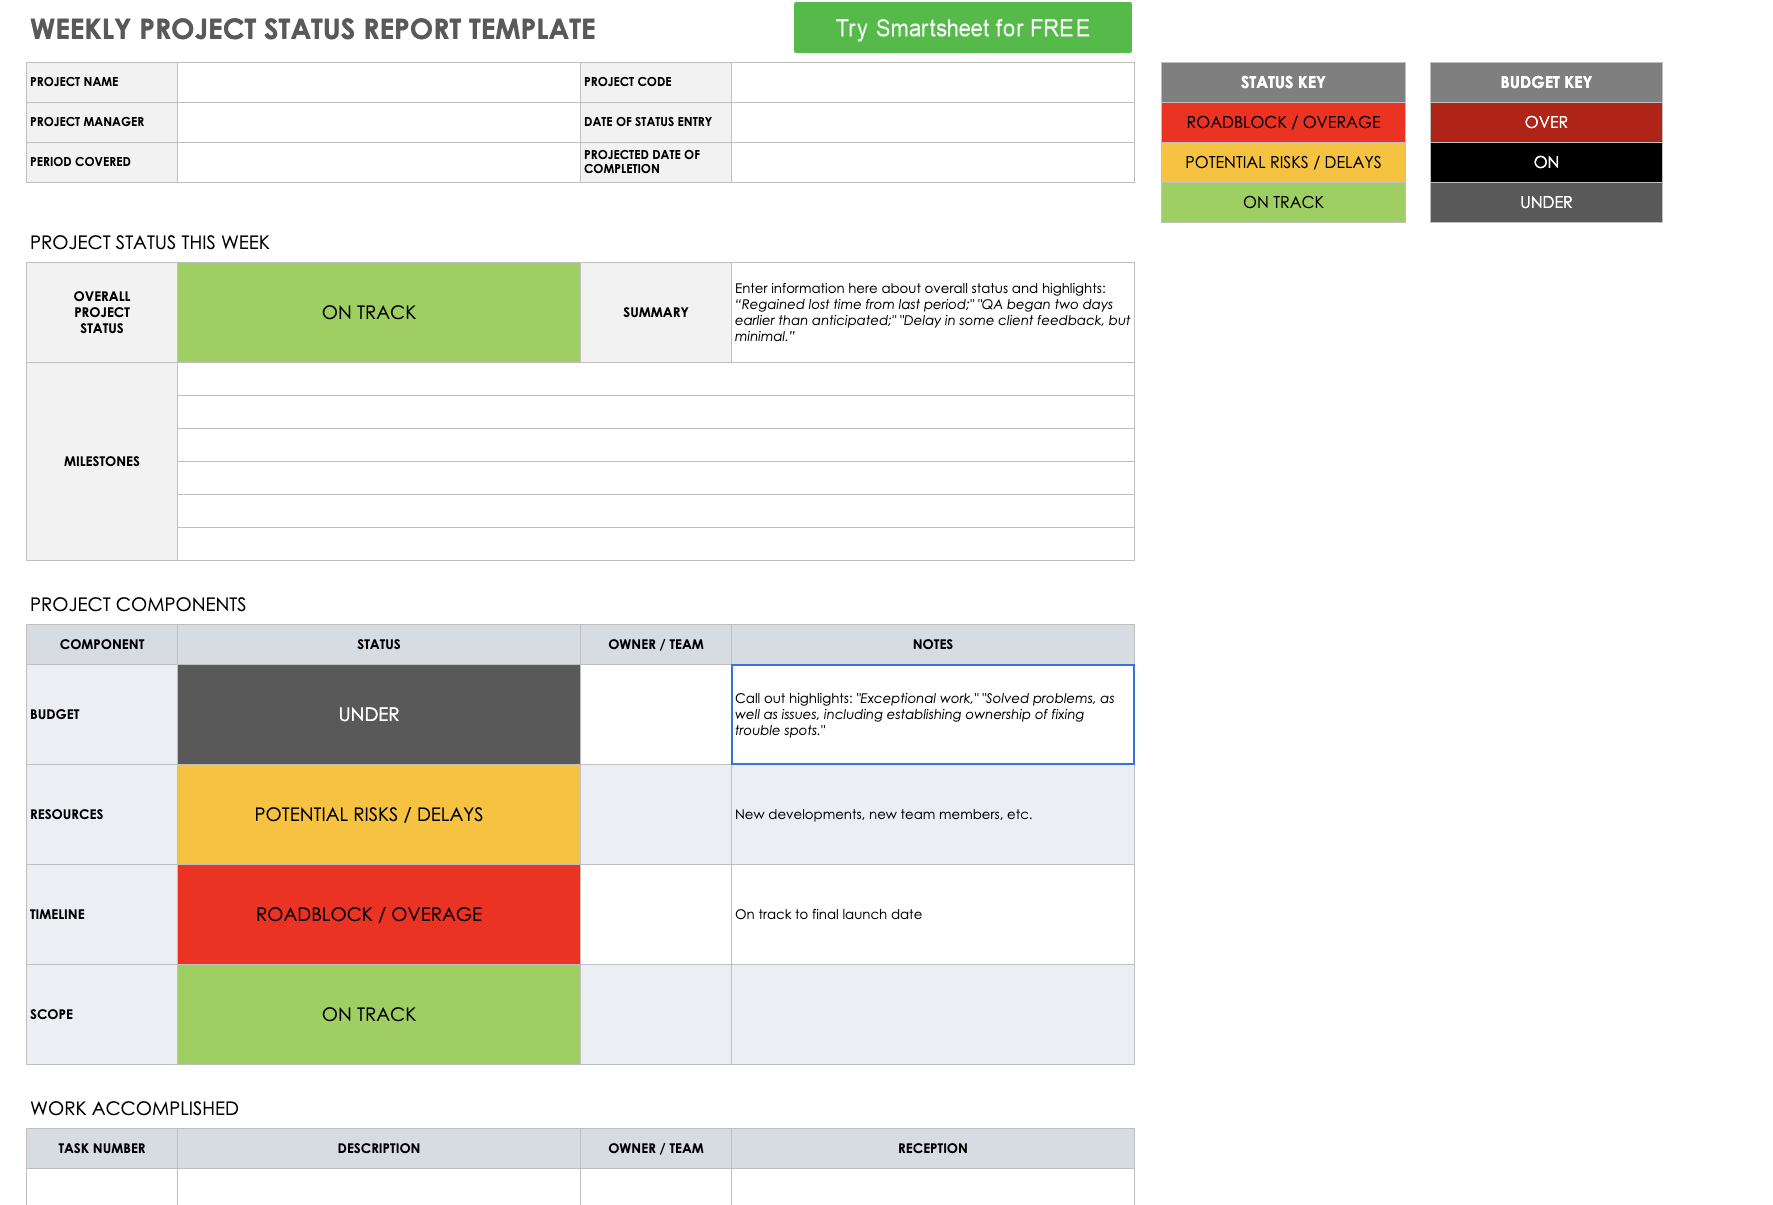 Image of template from Smartsheet